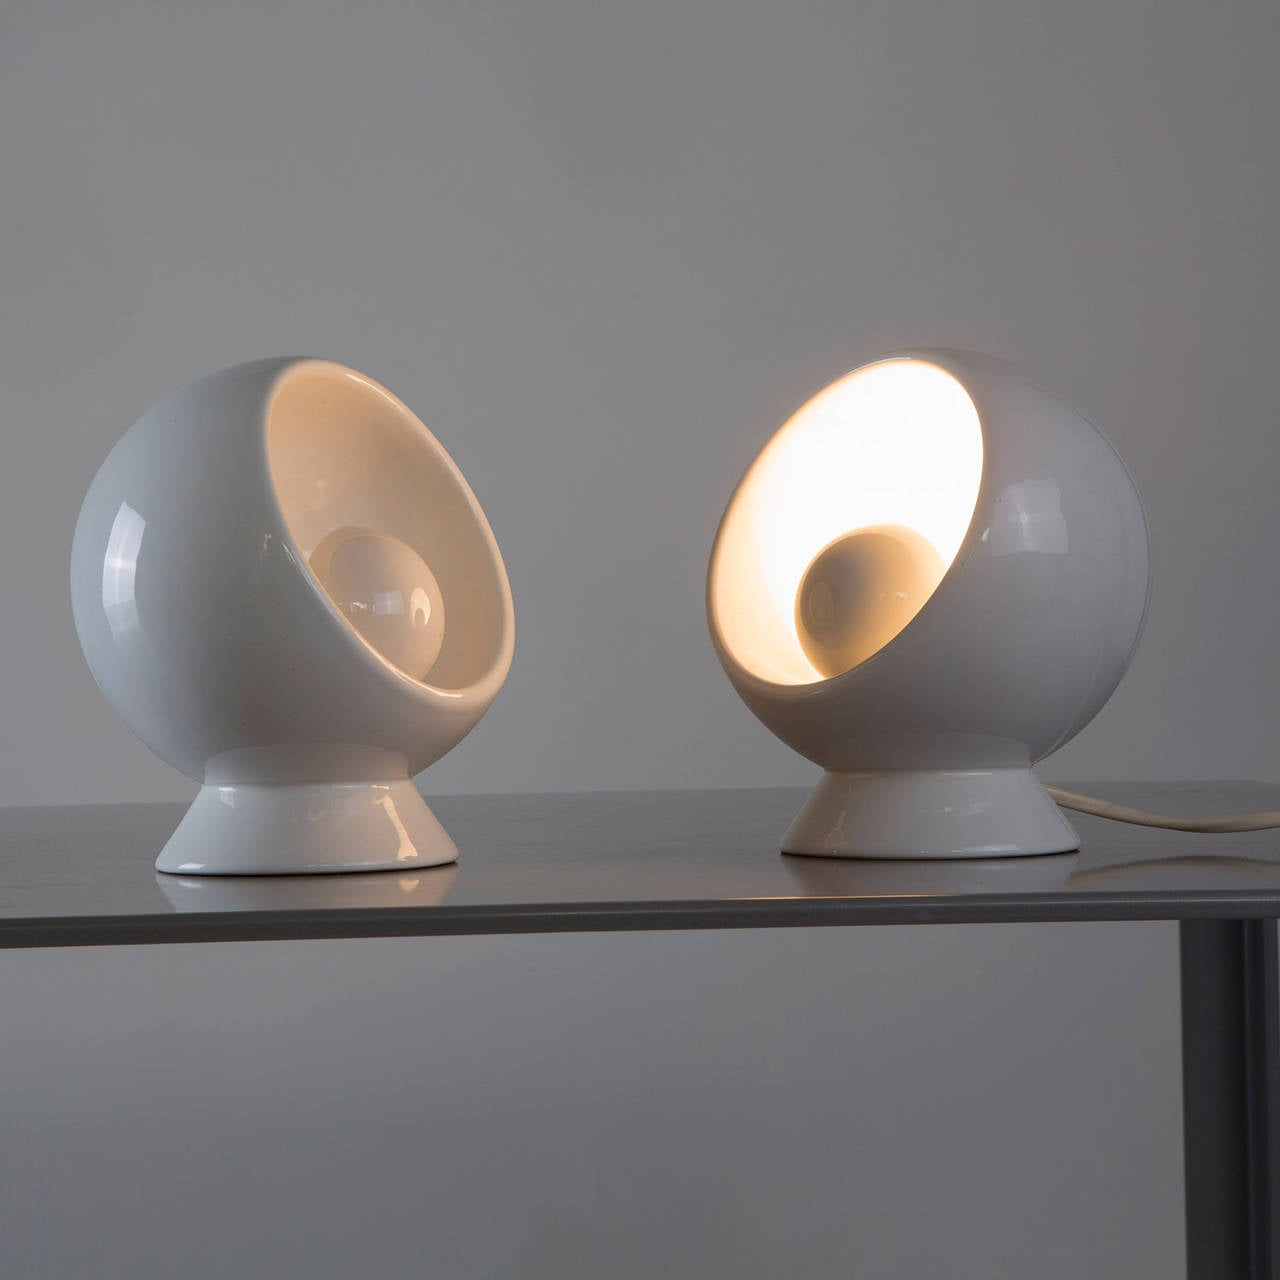 Beautiful pair of ceramic table lamps attributed to Marcello Cuneo for Gabbianelli.
Typical experimental Italian production of the period with revolving shader, curious homage to the more famous 